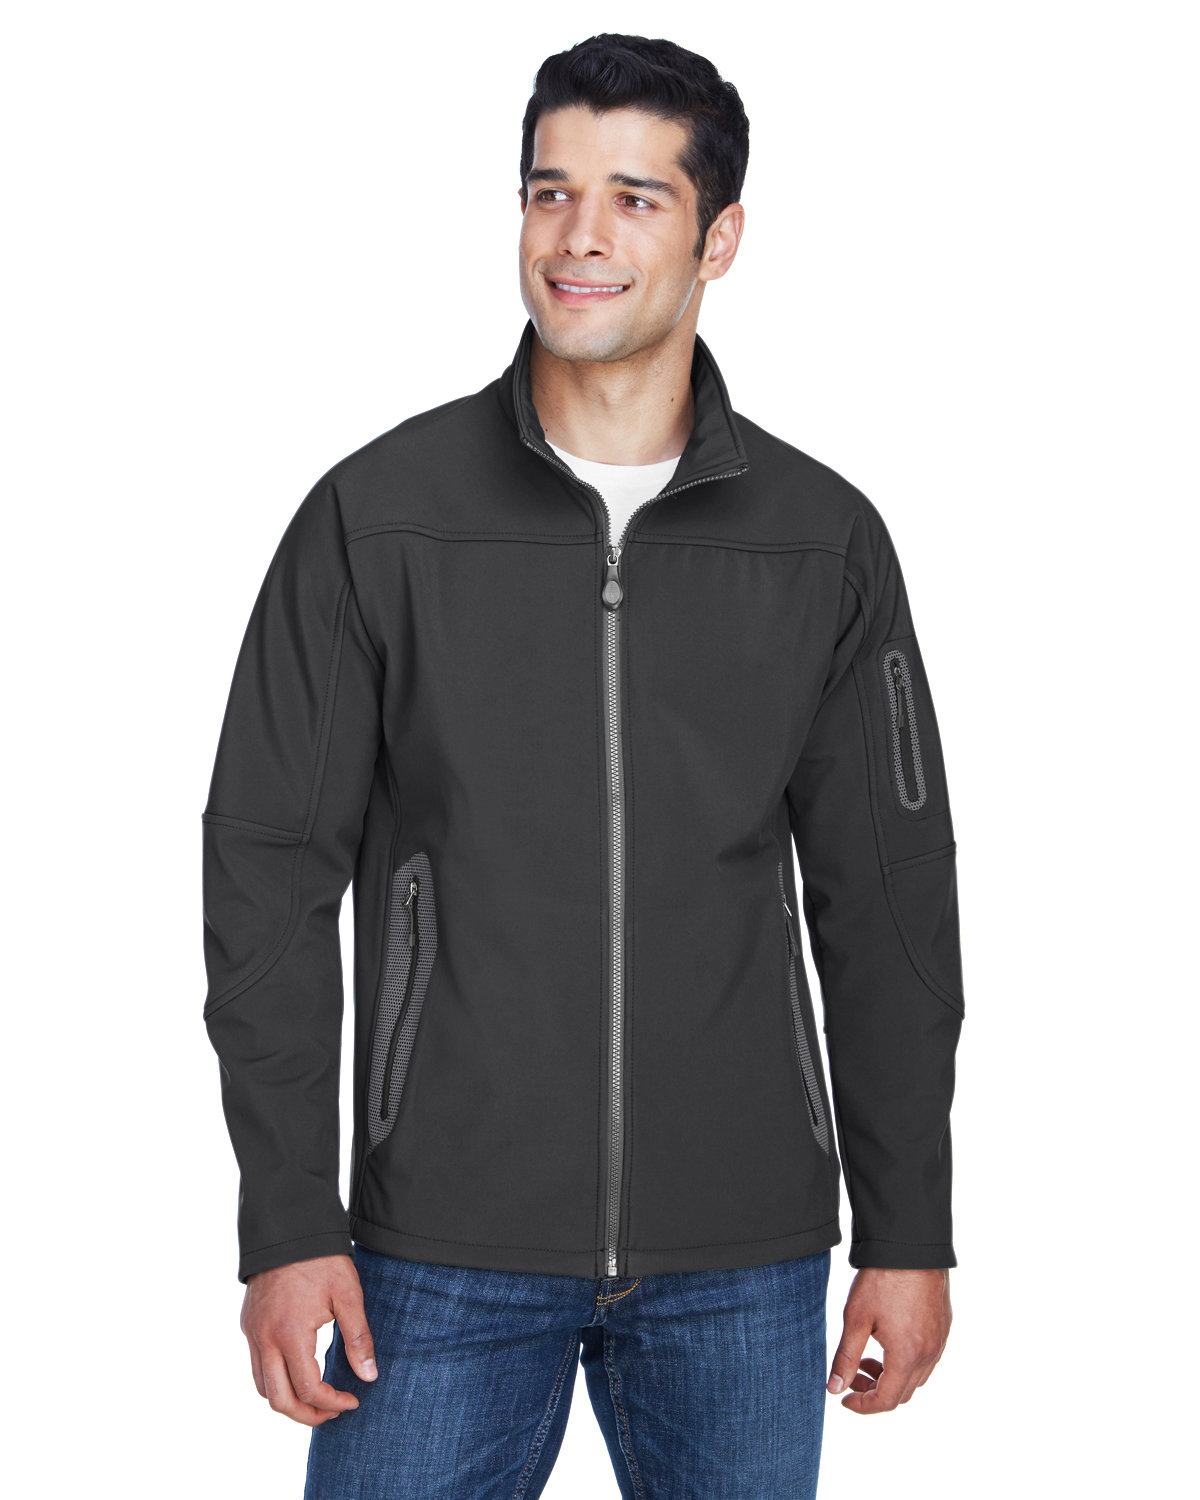 North End 88138 - Men's Three-Layer Fleece Bonded Soft Shell Technical Jacket